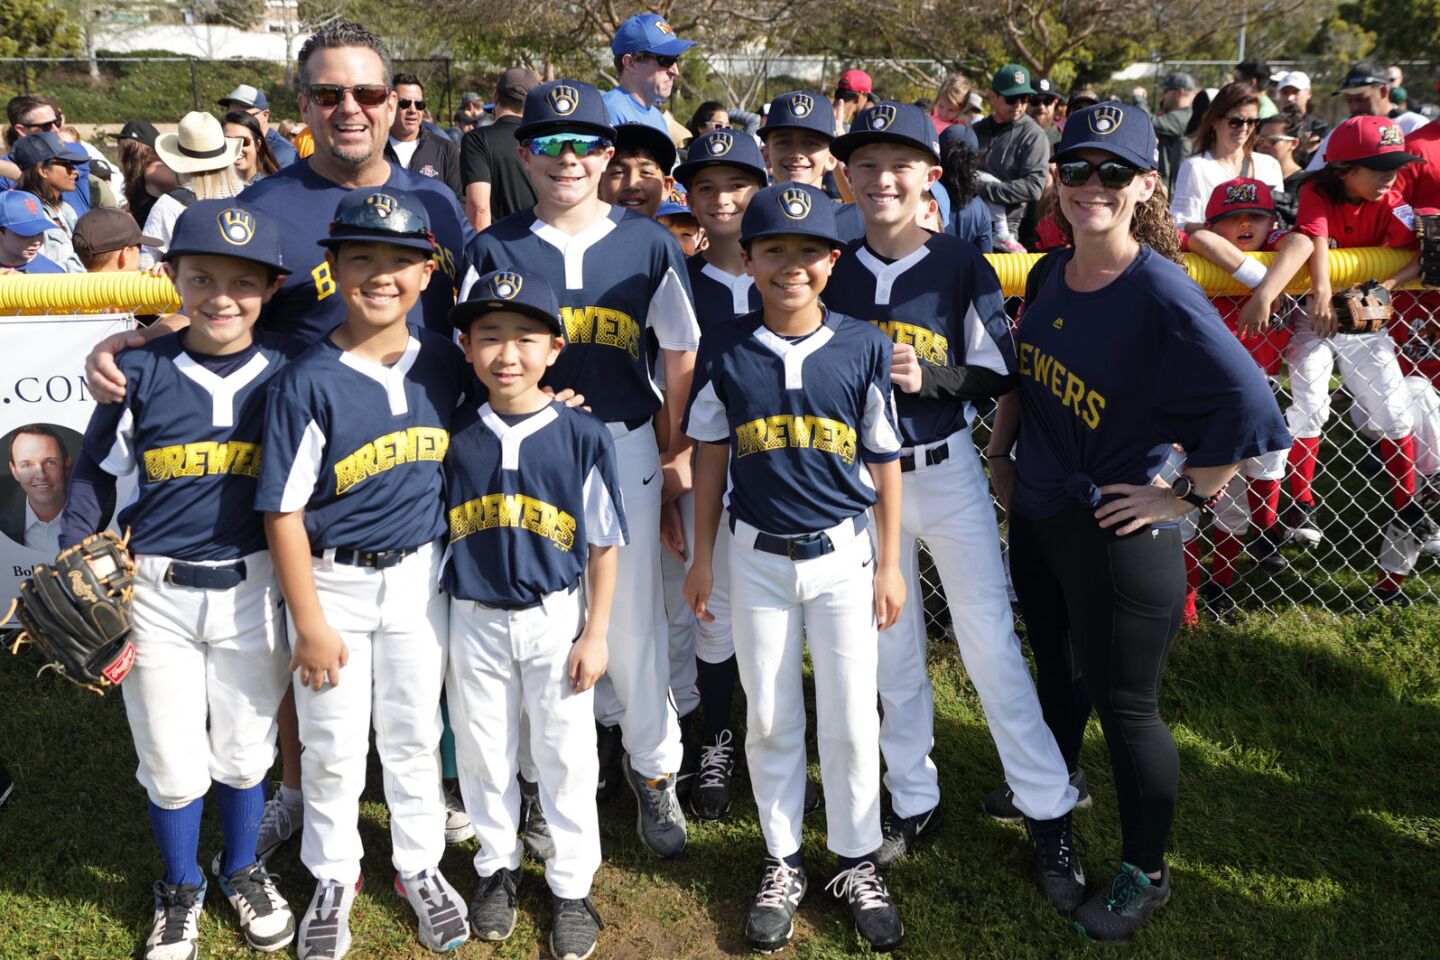 Brewers at the Del Mar Little League Opening Day